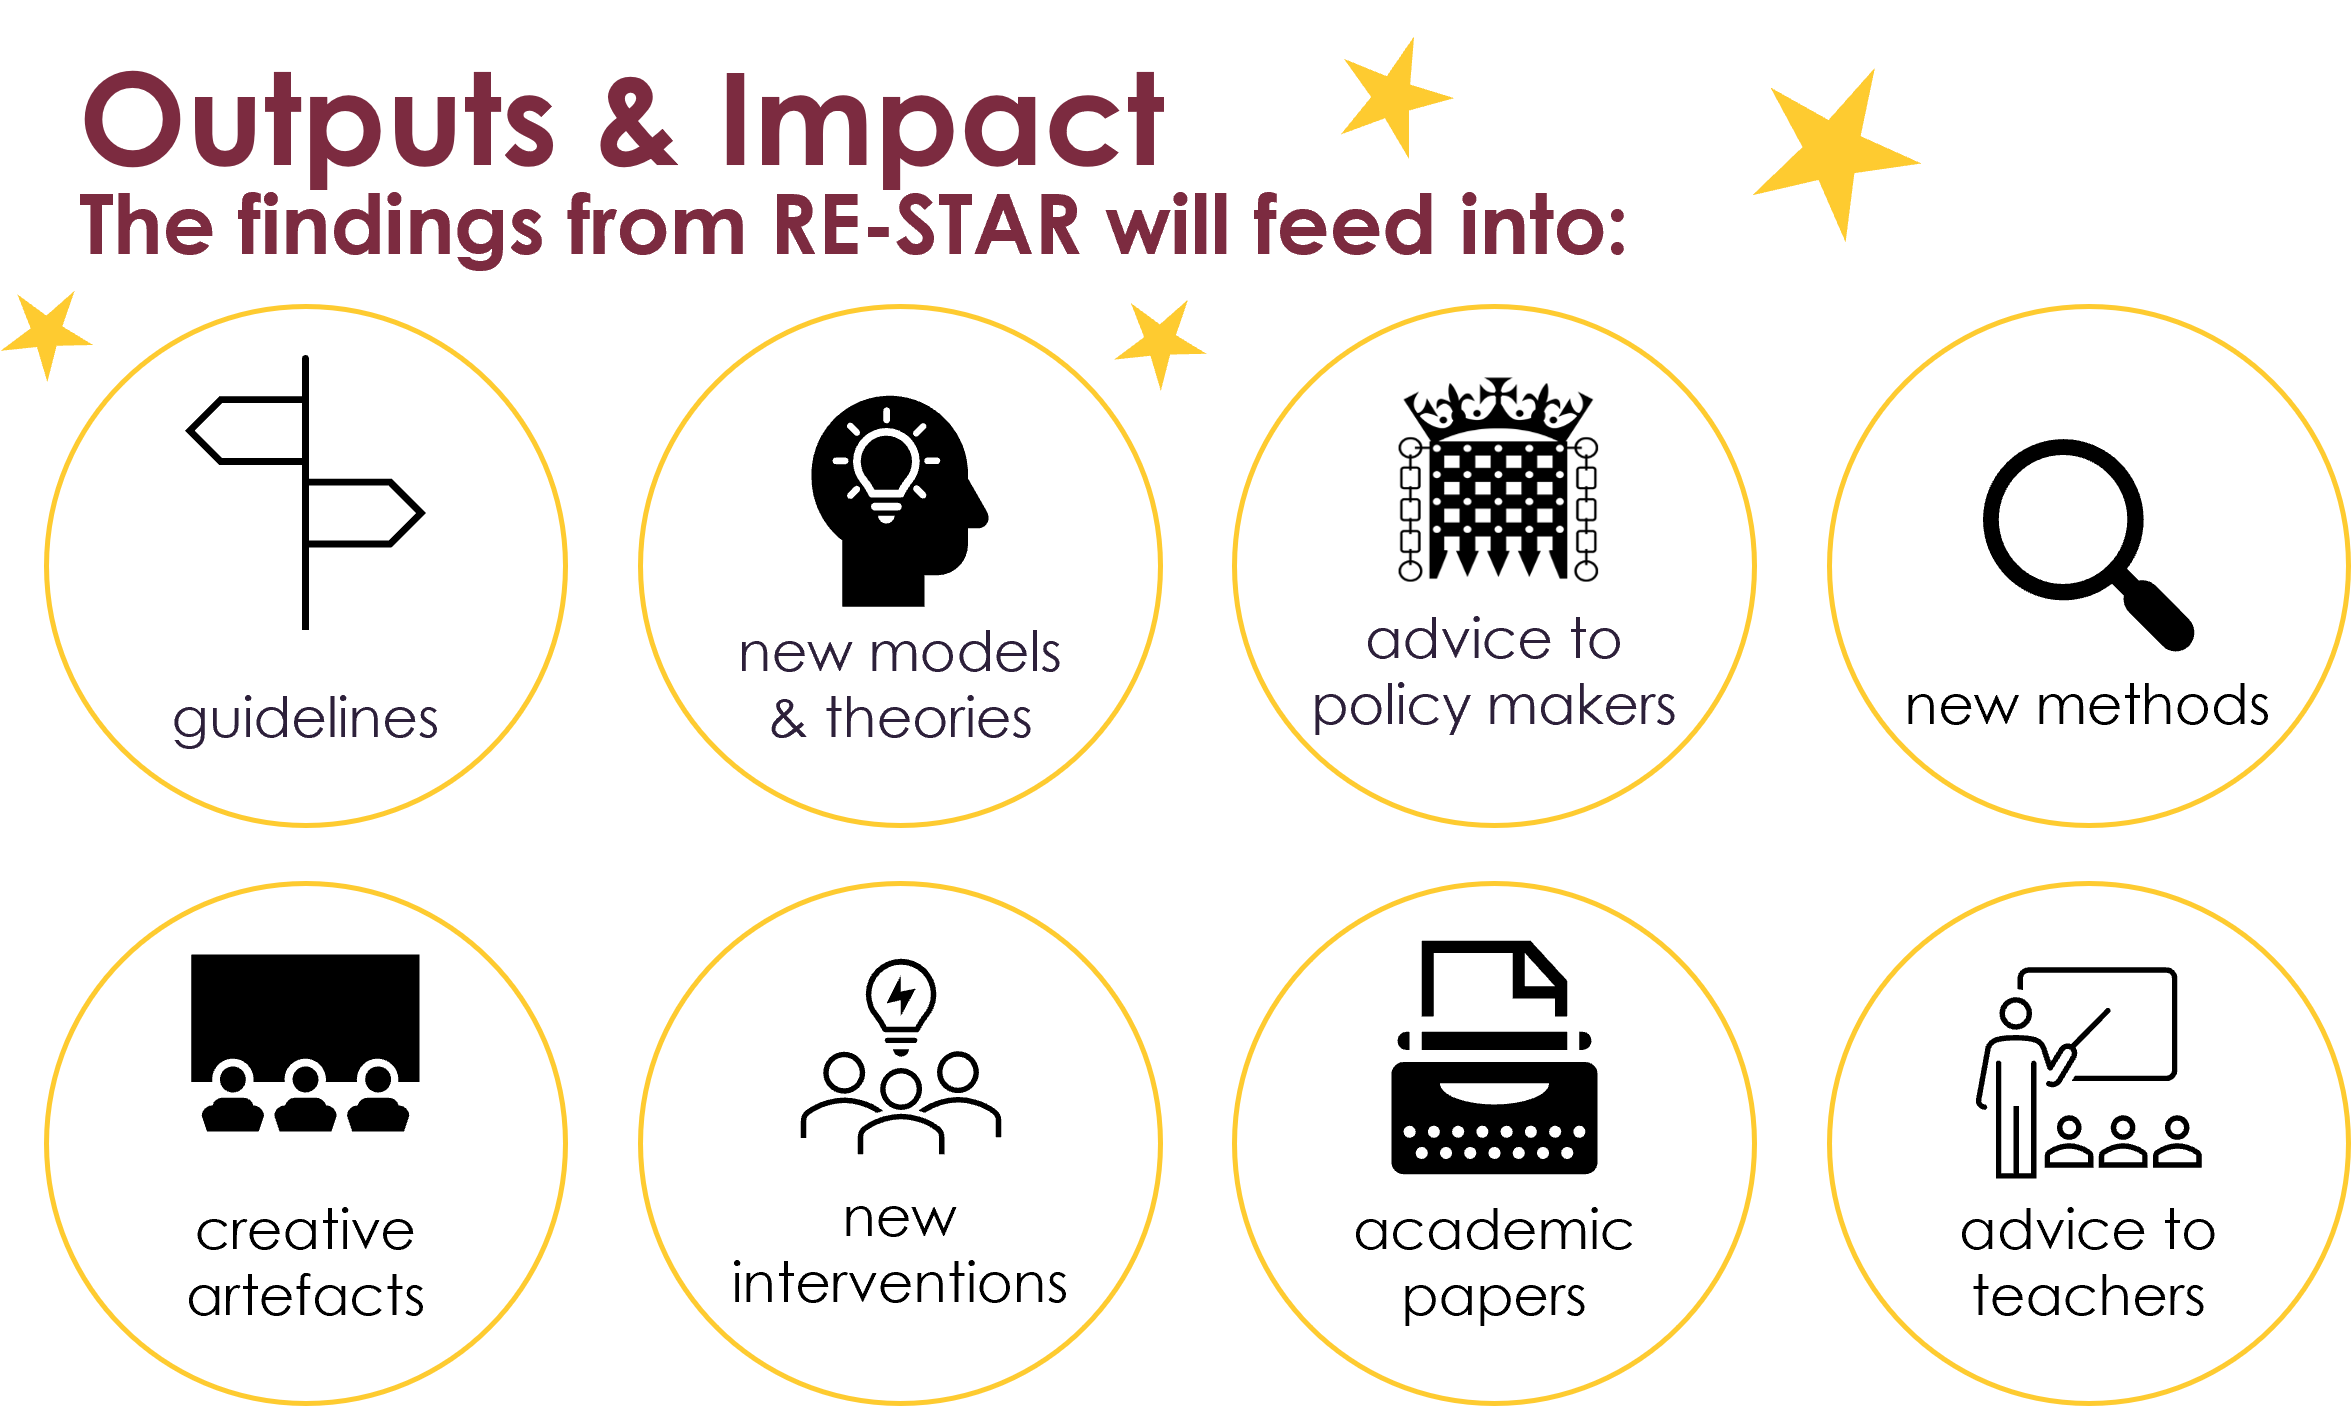 RE-STAR outputs and impact